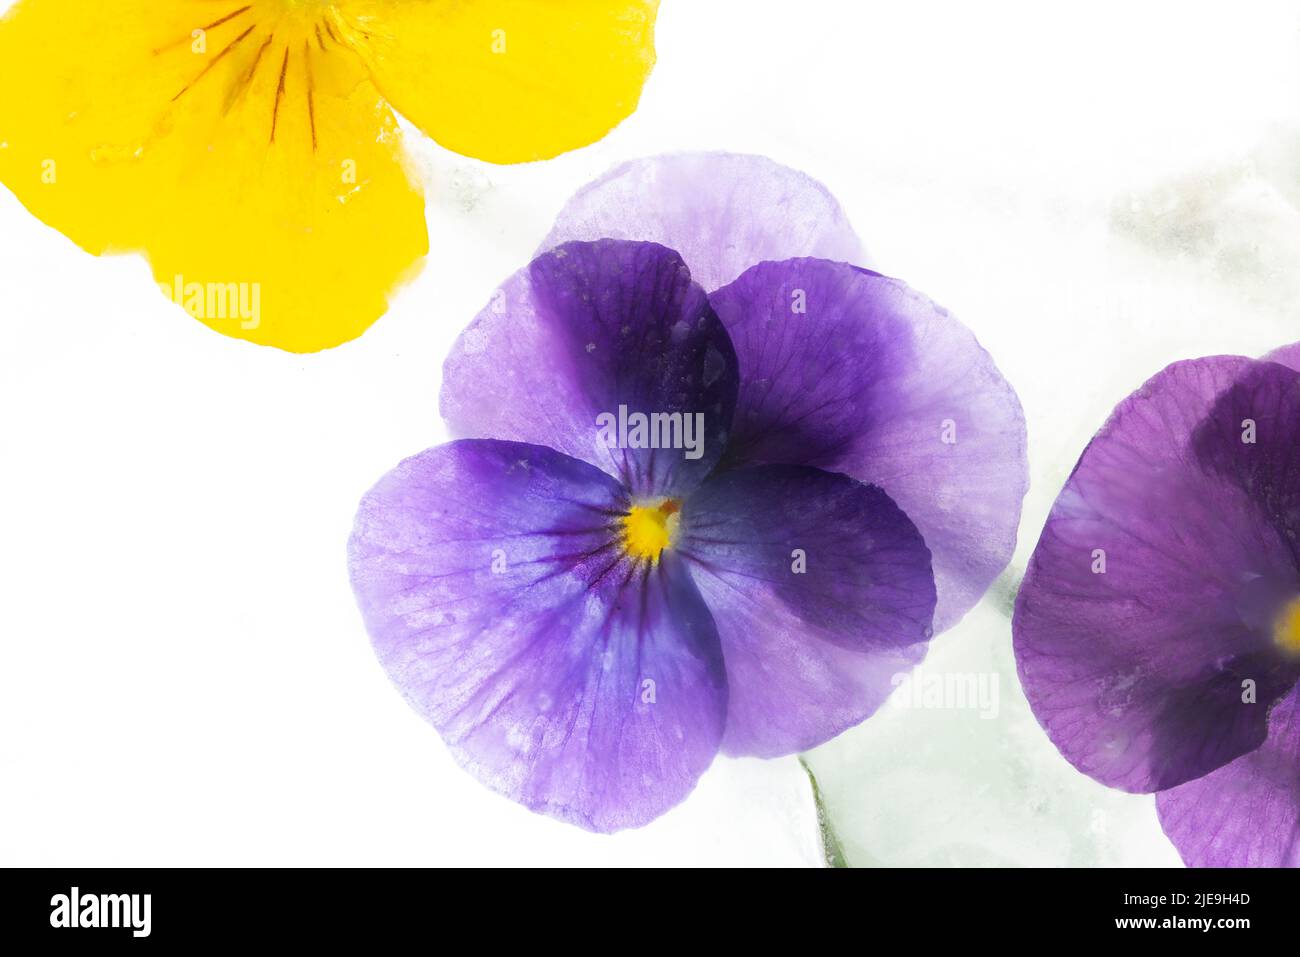 Background of mixed colours of pansy flowers in ice. Stock Photo